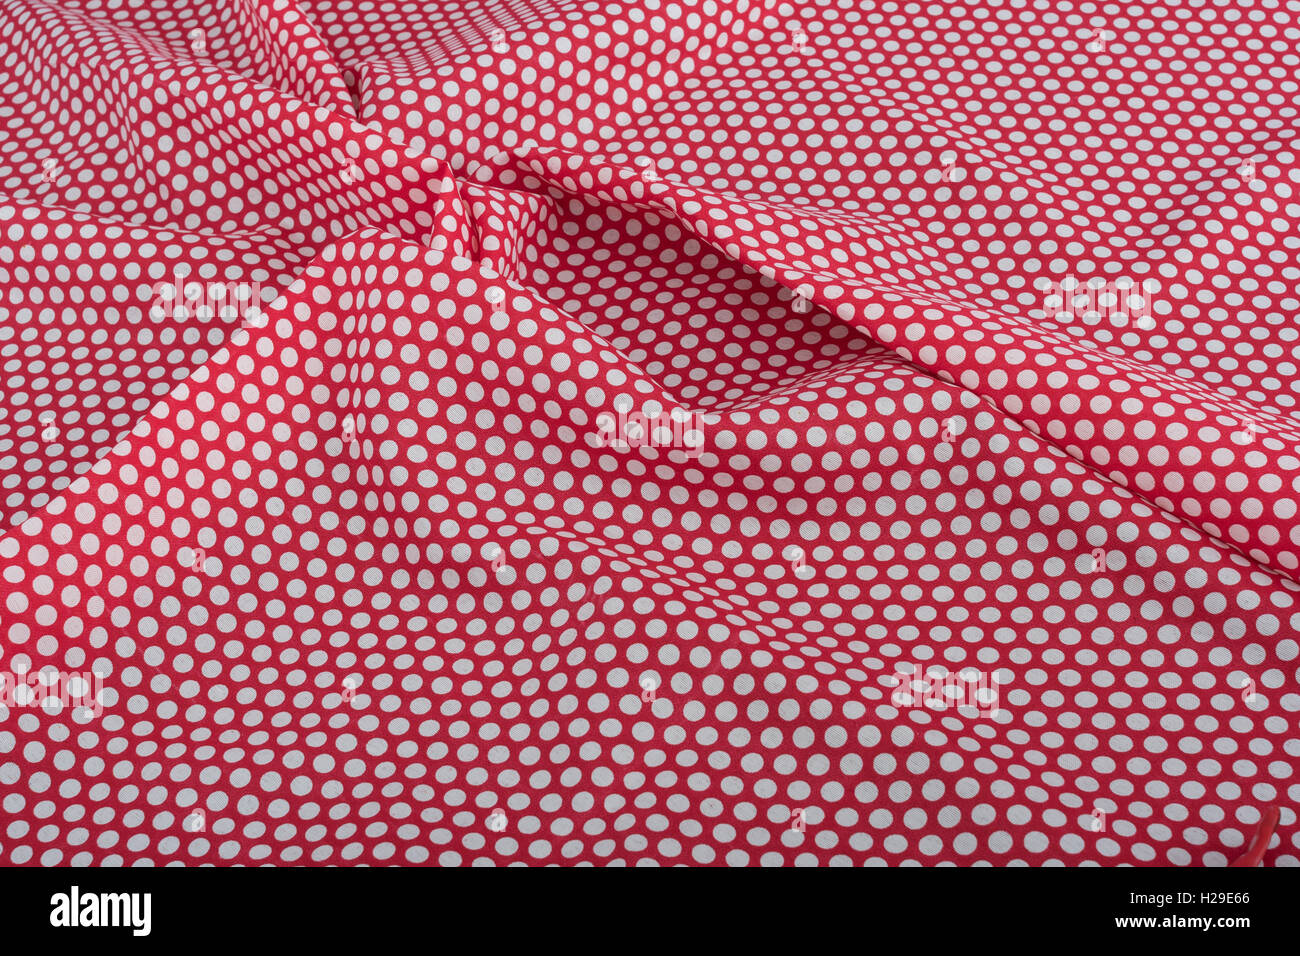 Abstract red-white polka dot cotton material. Concept 'International Dot Day' and perhaps a dotty personality, dotty person. Stock Photo